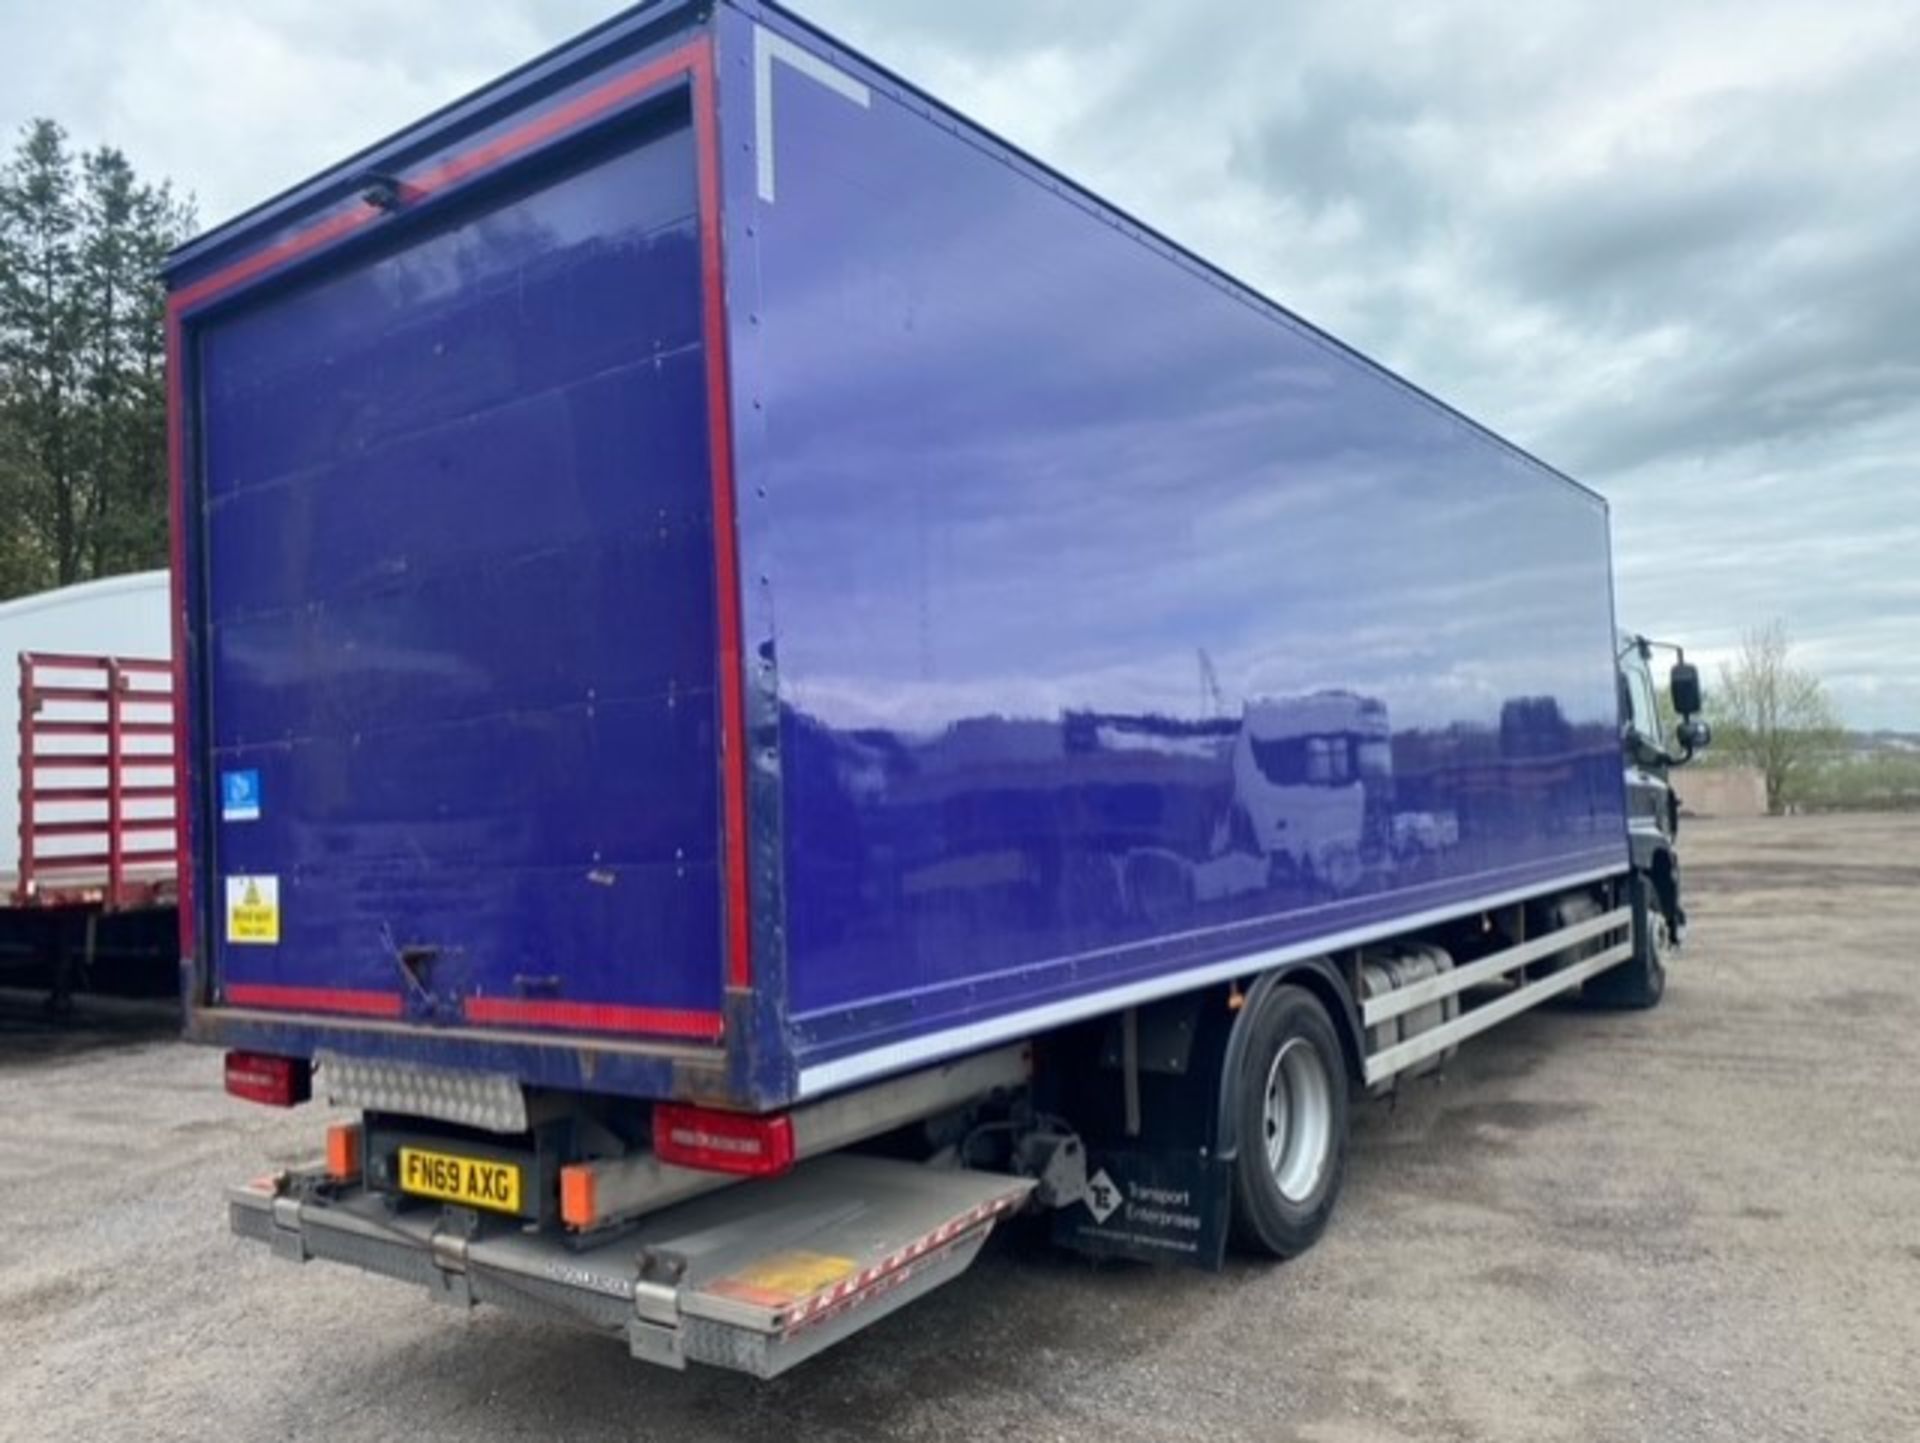 2019, DAF CF 260 - FN69 AXG (18 Ton Rigid Truck with Tail Lift) - Image 10 of 16